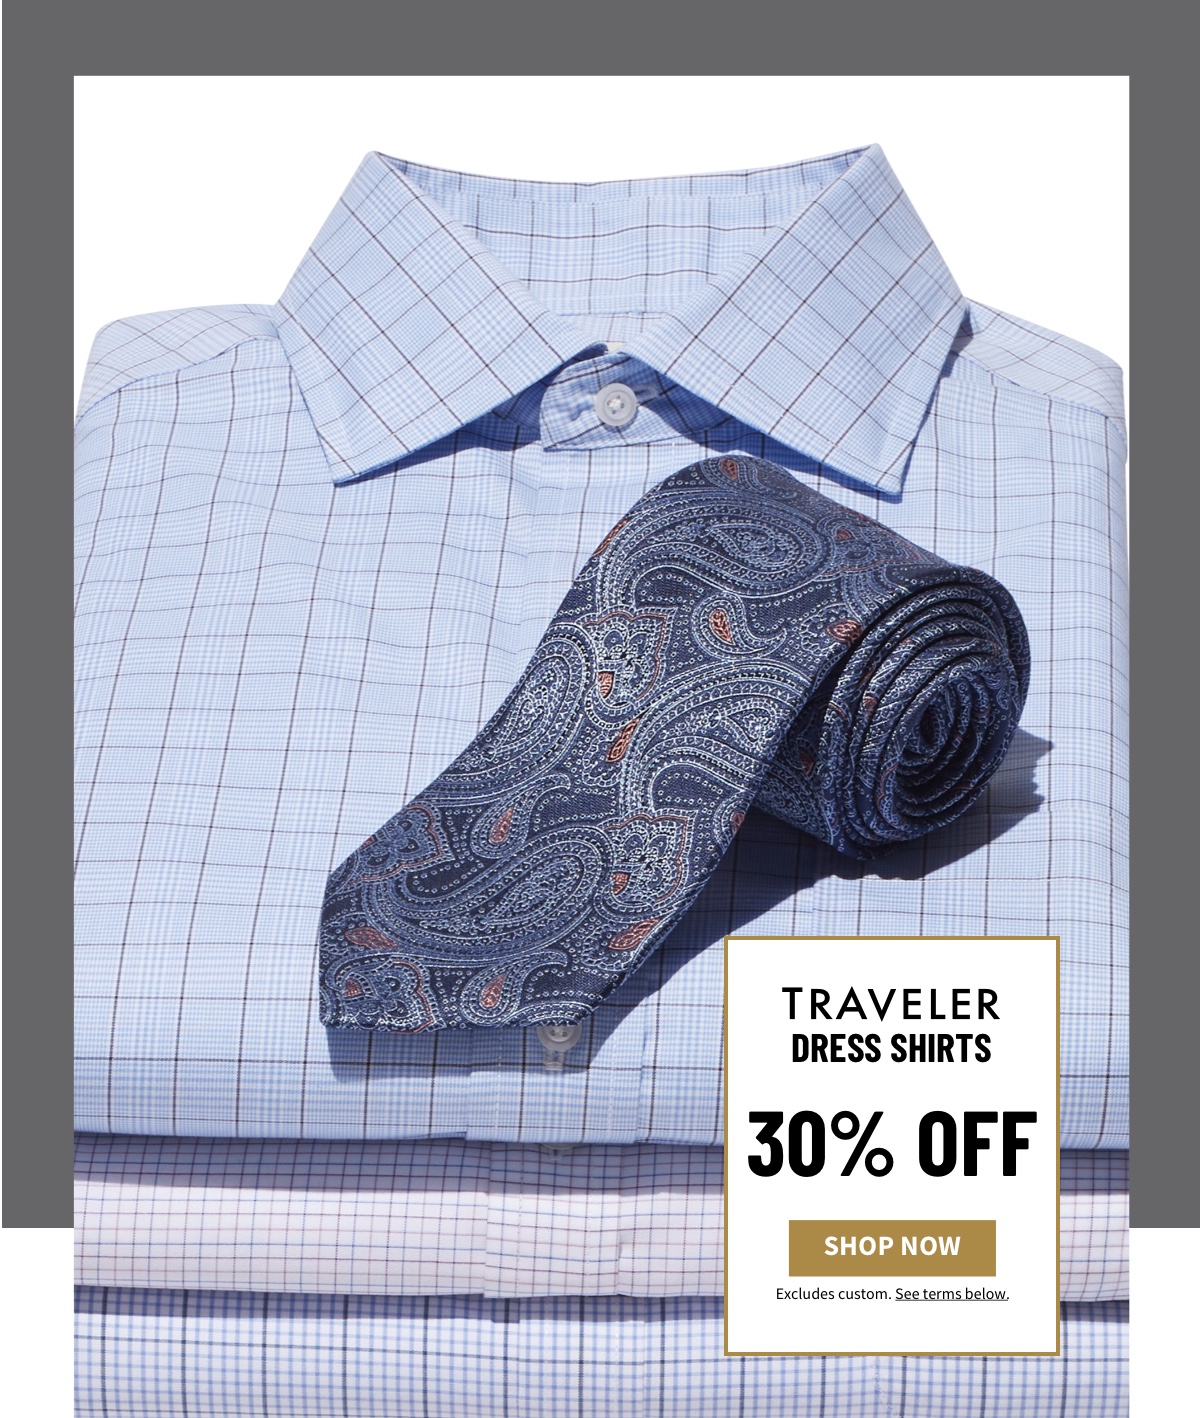 Traveler Dress Shirts 30% off Shop Now Excludes custom. See terms below.